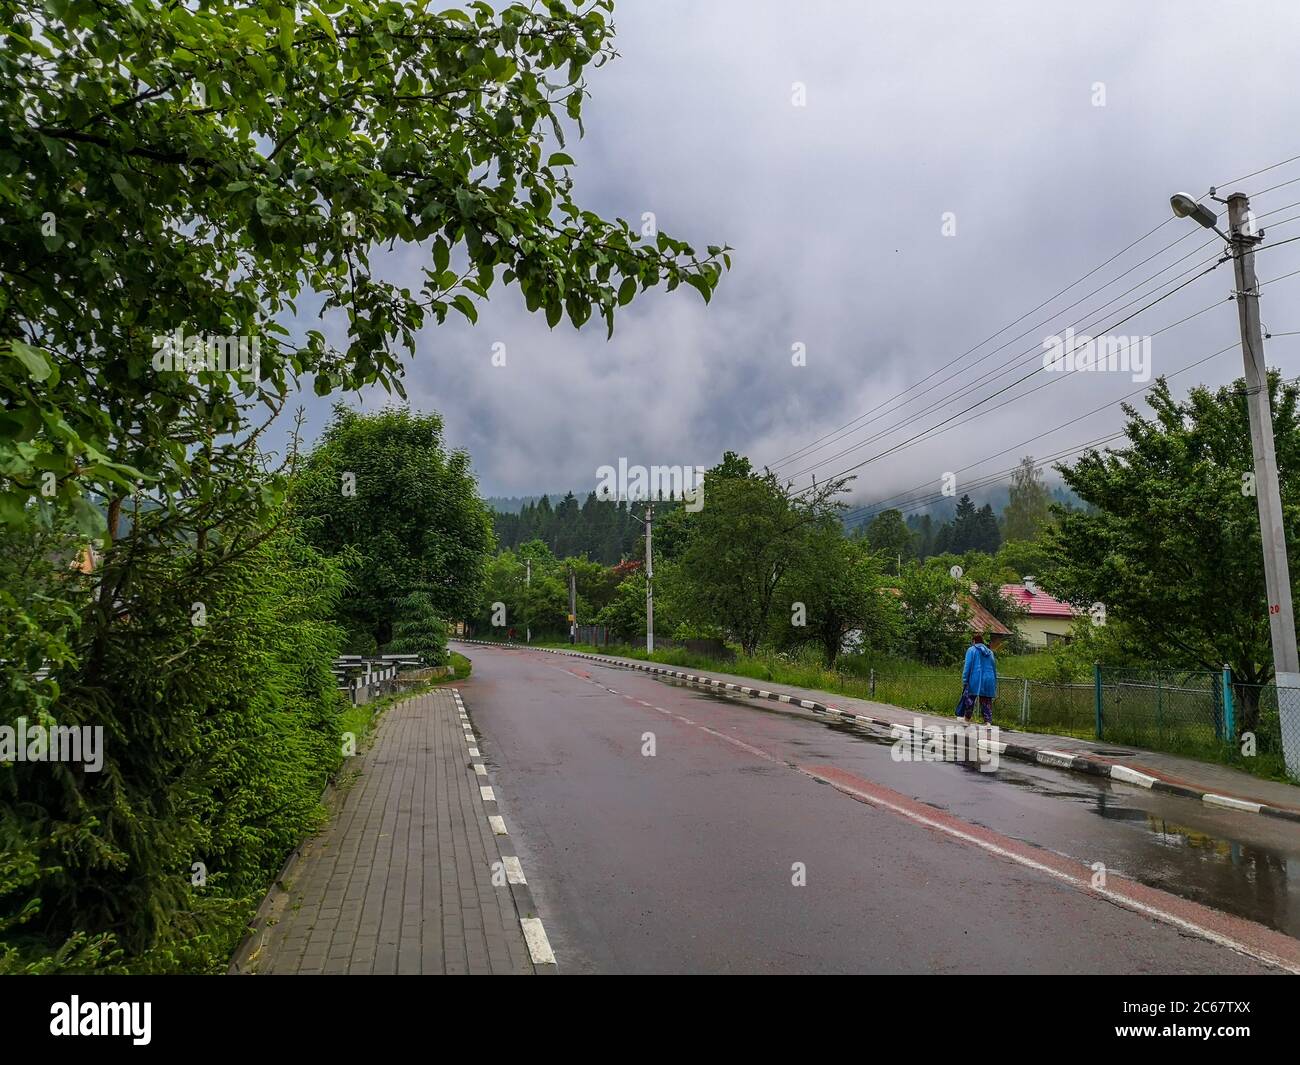 Woman pedestrian in rainwear walking along the country road in carpathian mountains. Cloudy weather with dark storm clouds. Stock Photo